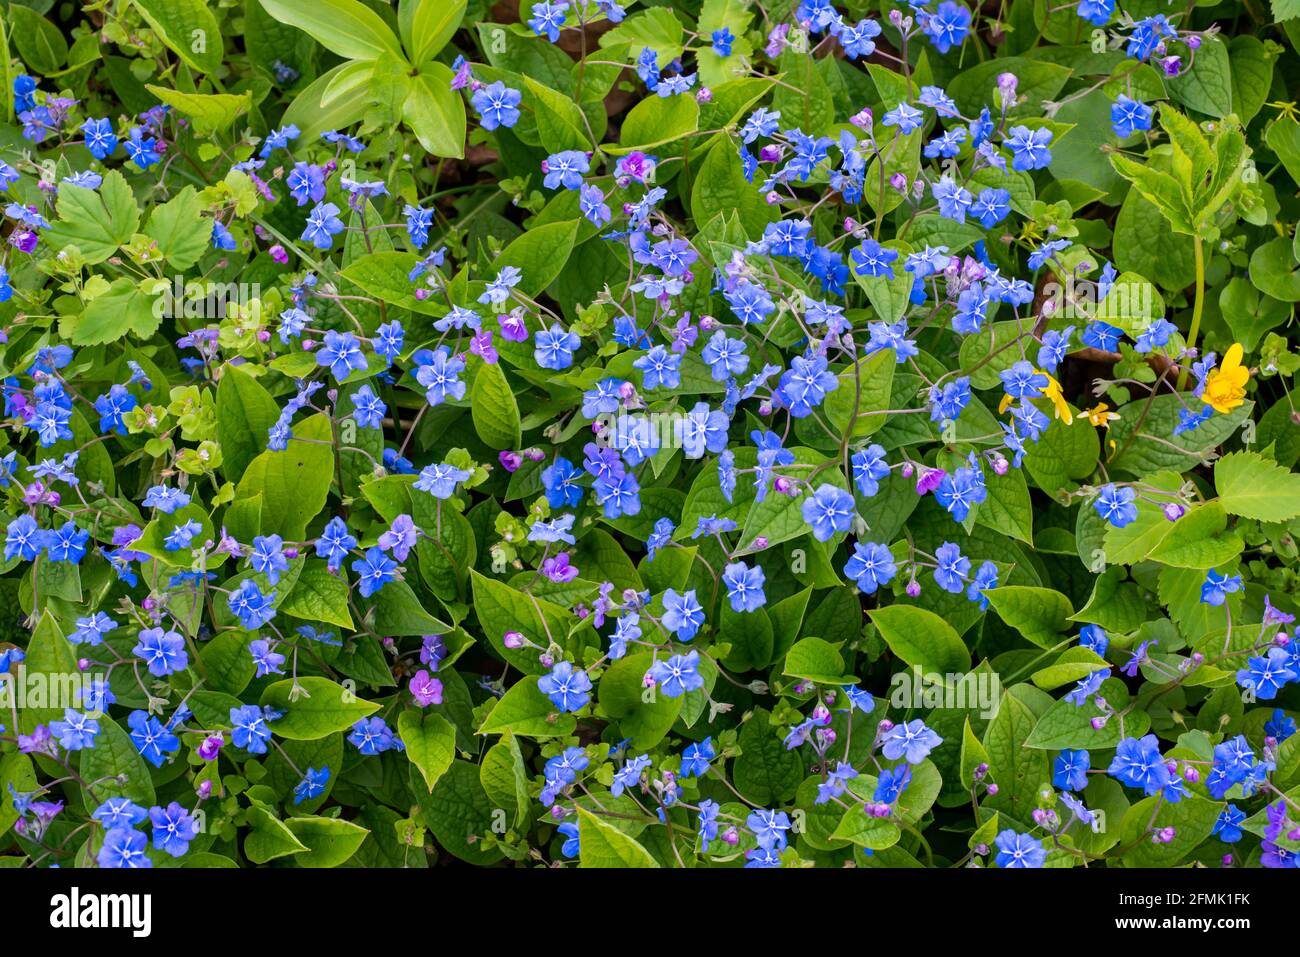 Omphalodes verna (common names creeping navelwort or blue-eyed-Mary is an herbaceous perennial rhizomatous plant of the genus Omphalodes belonging to Stock Photo